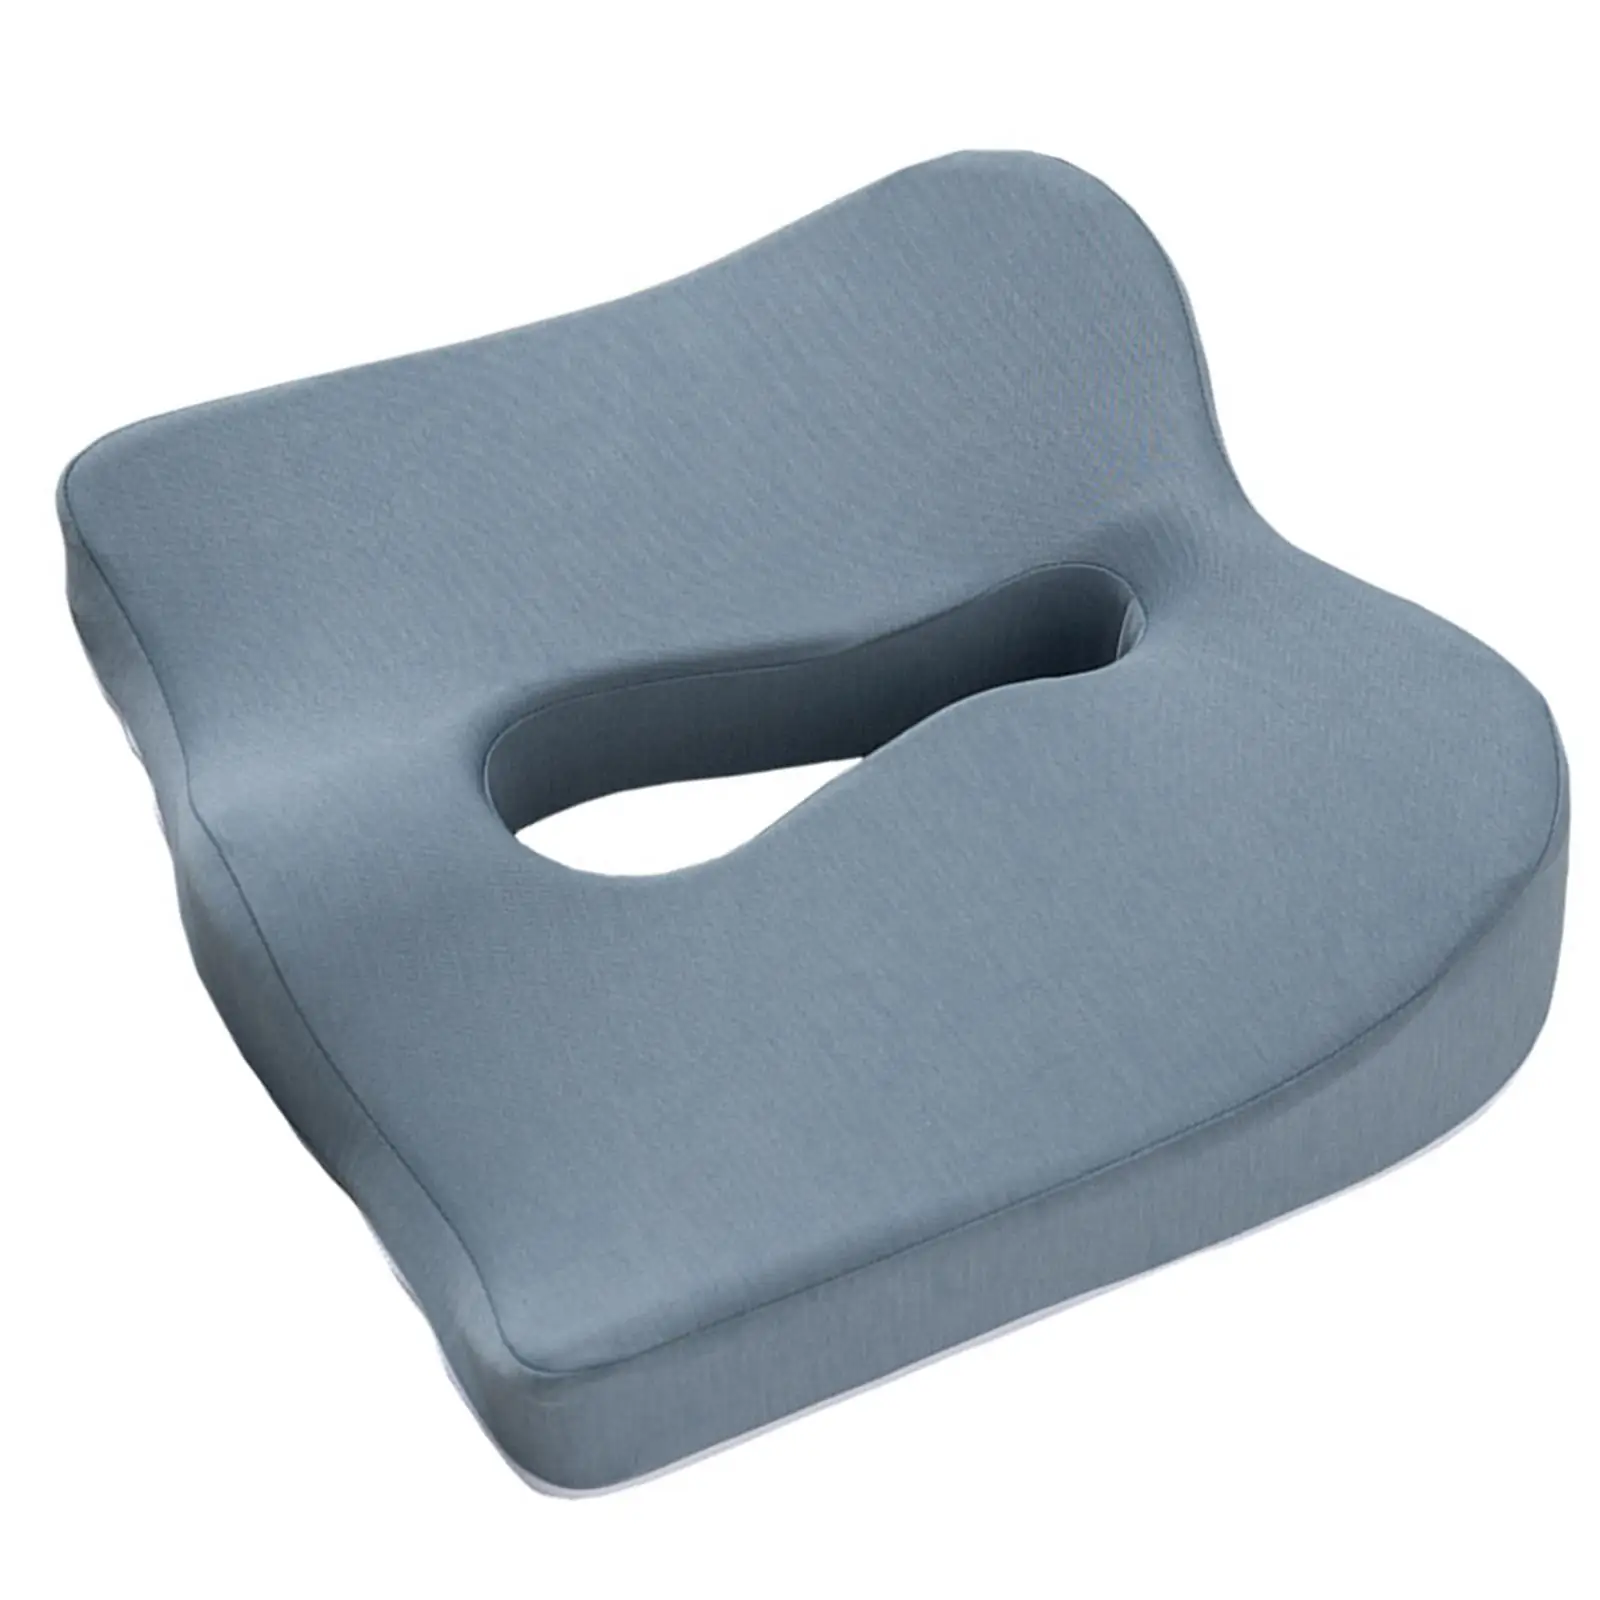 Seat Cushion for Long Sitting Memory Foam for Computer Desk Washable Cover Hip Support Non Slip Large Ergonomic